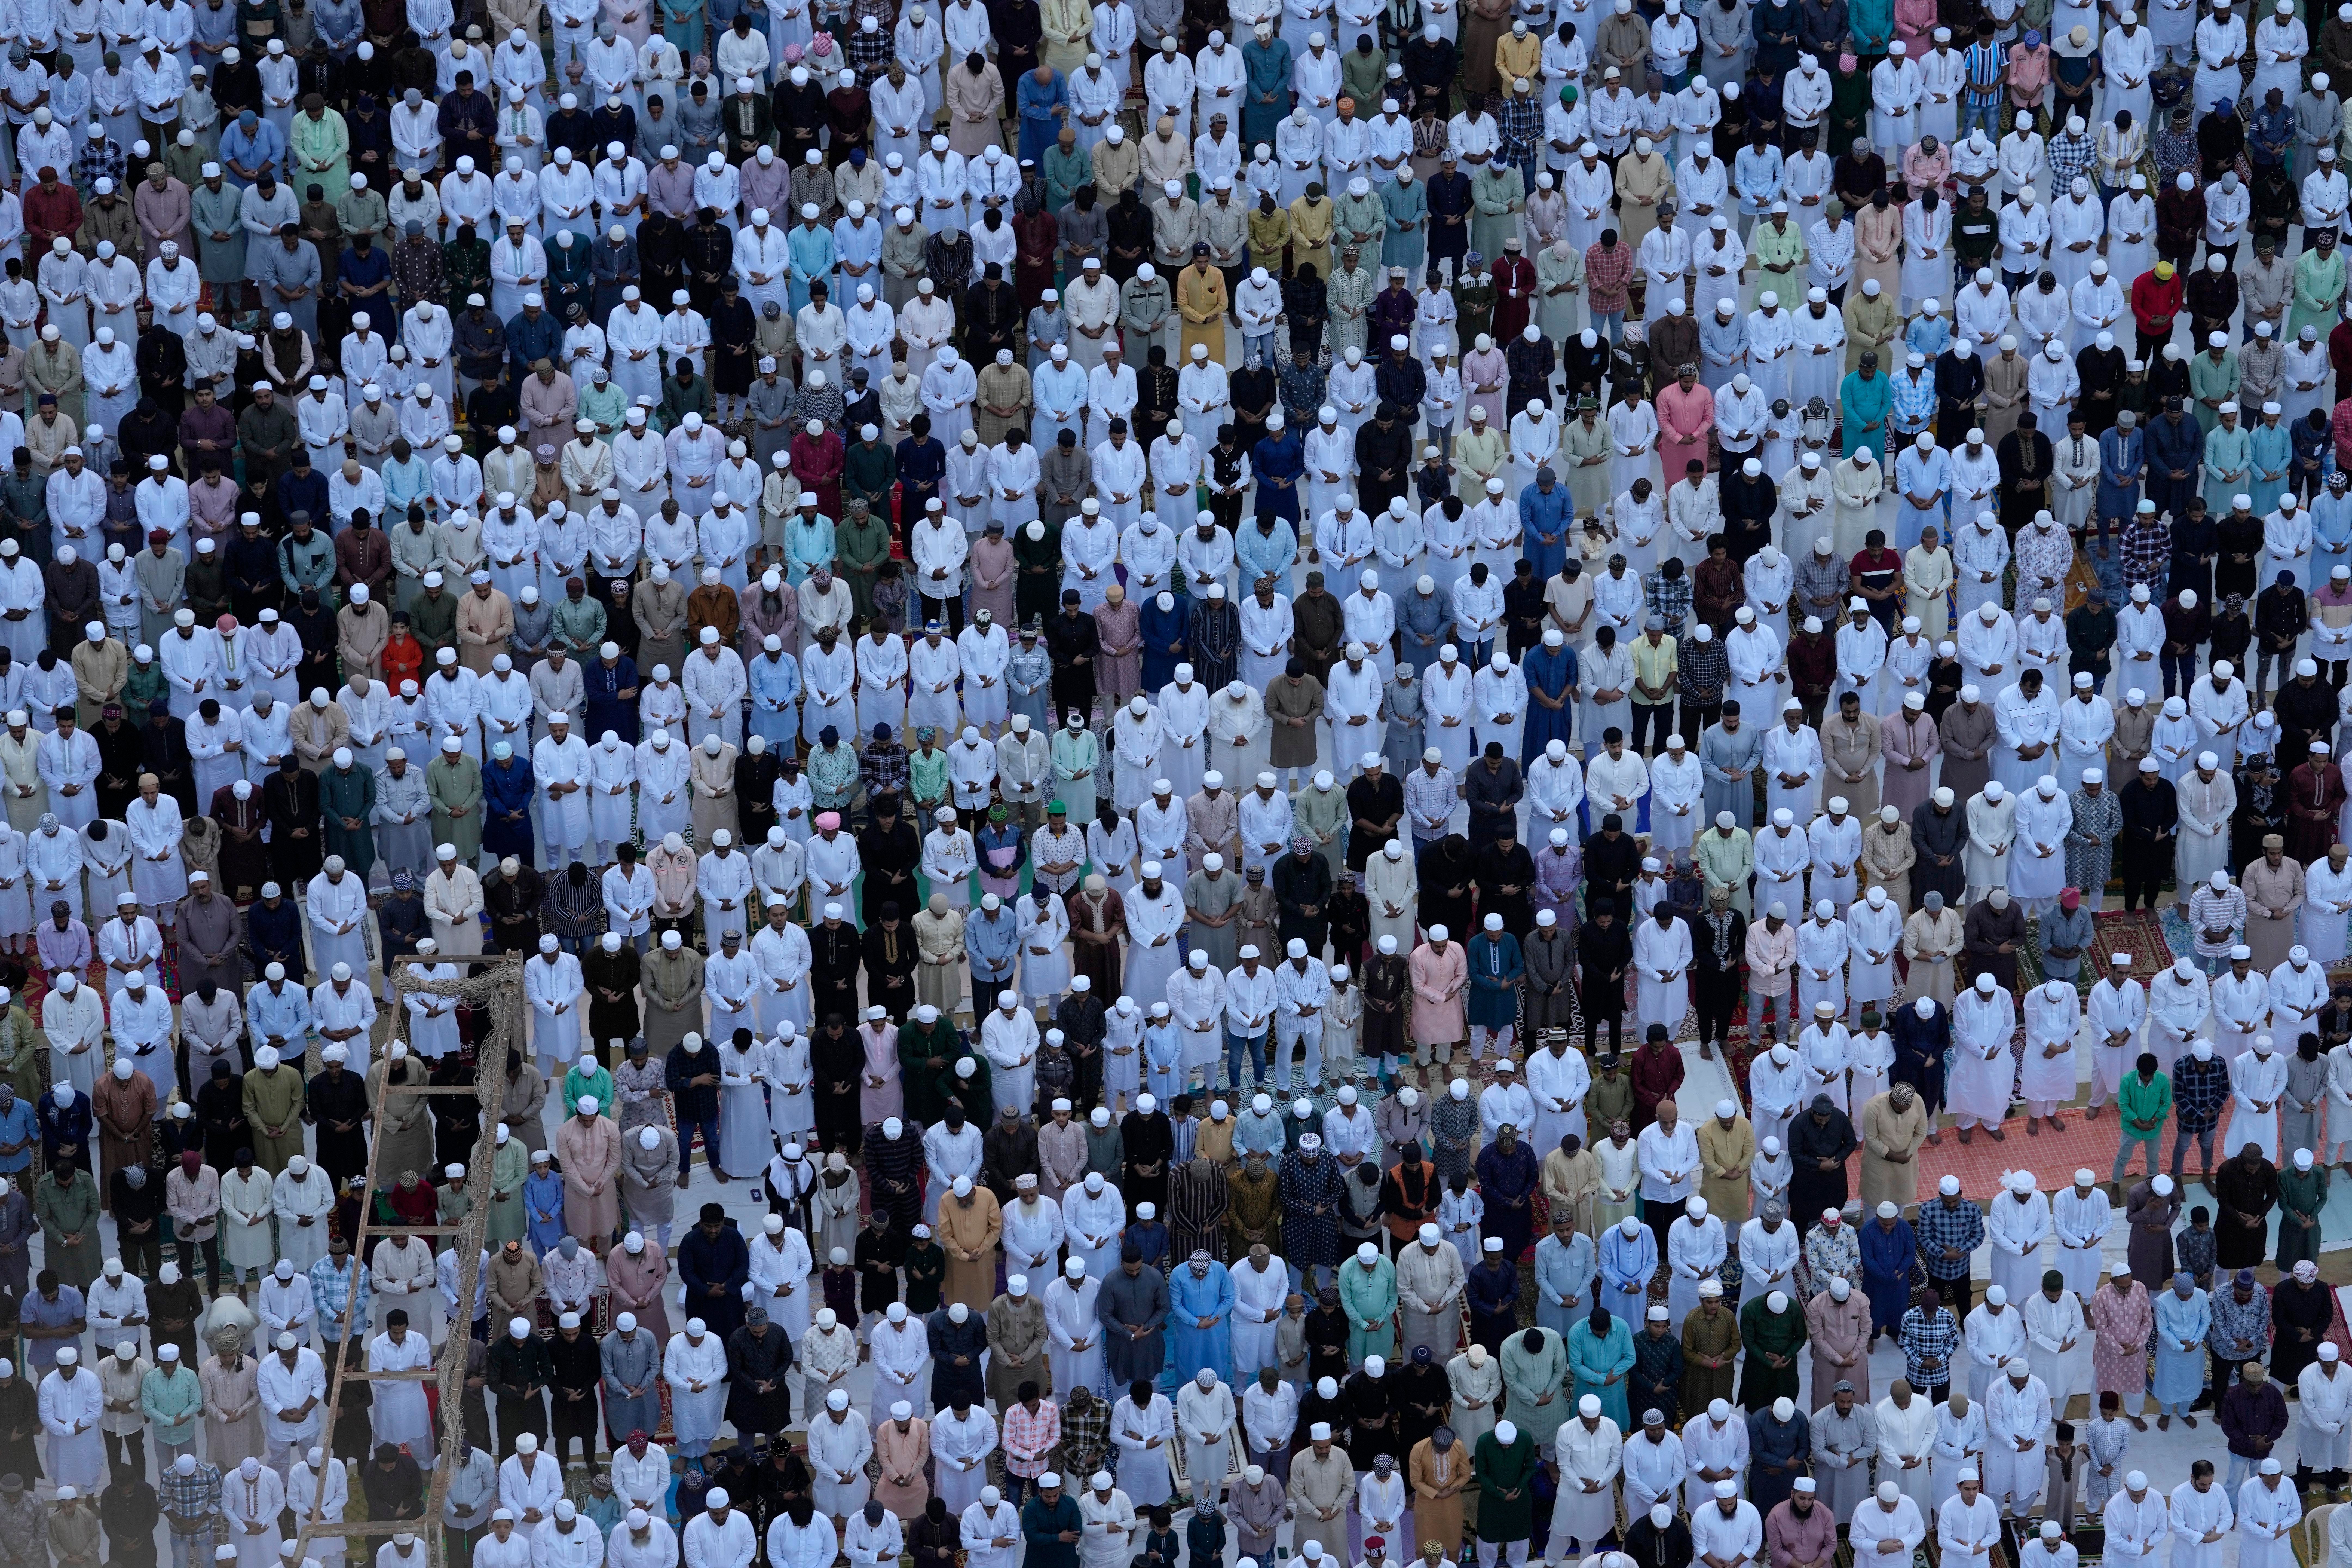 Muslims offer Eid prayers marking the end of the fasting month of Ramadan in Mumbai, India